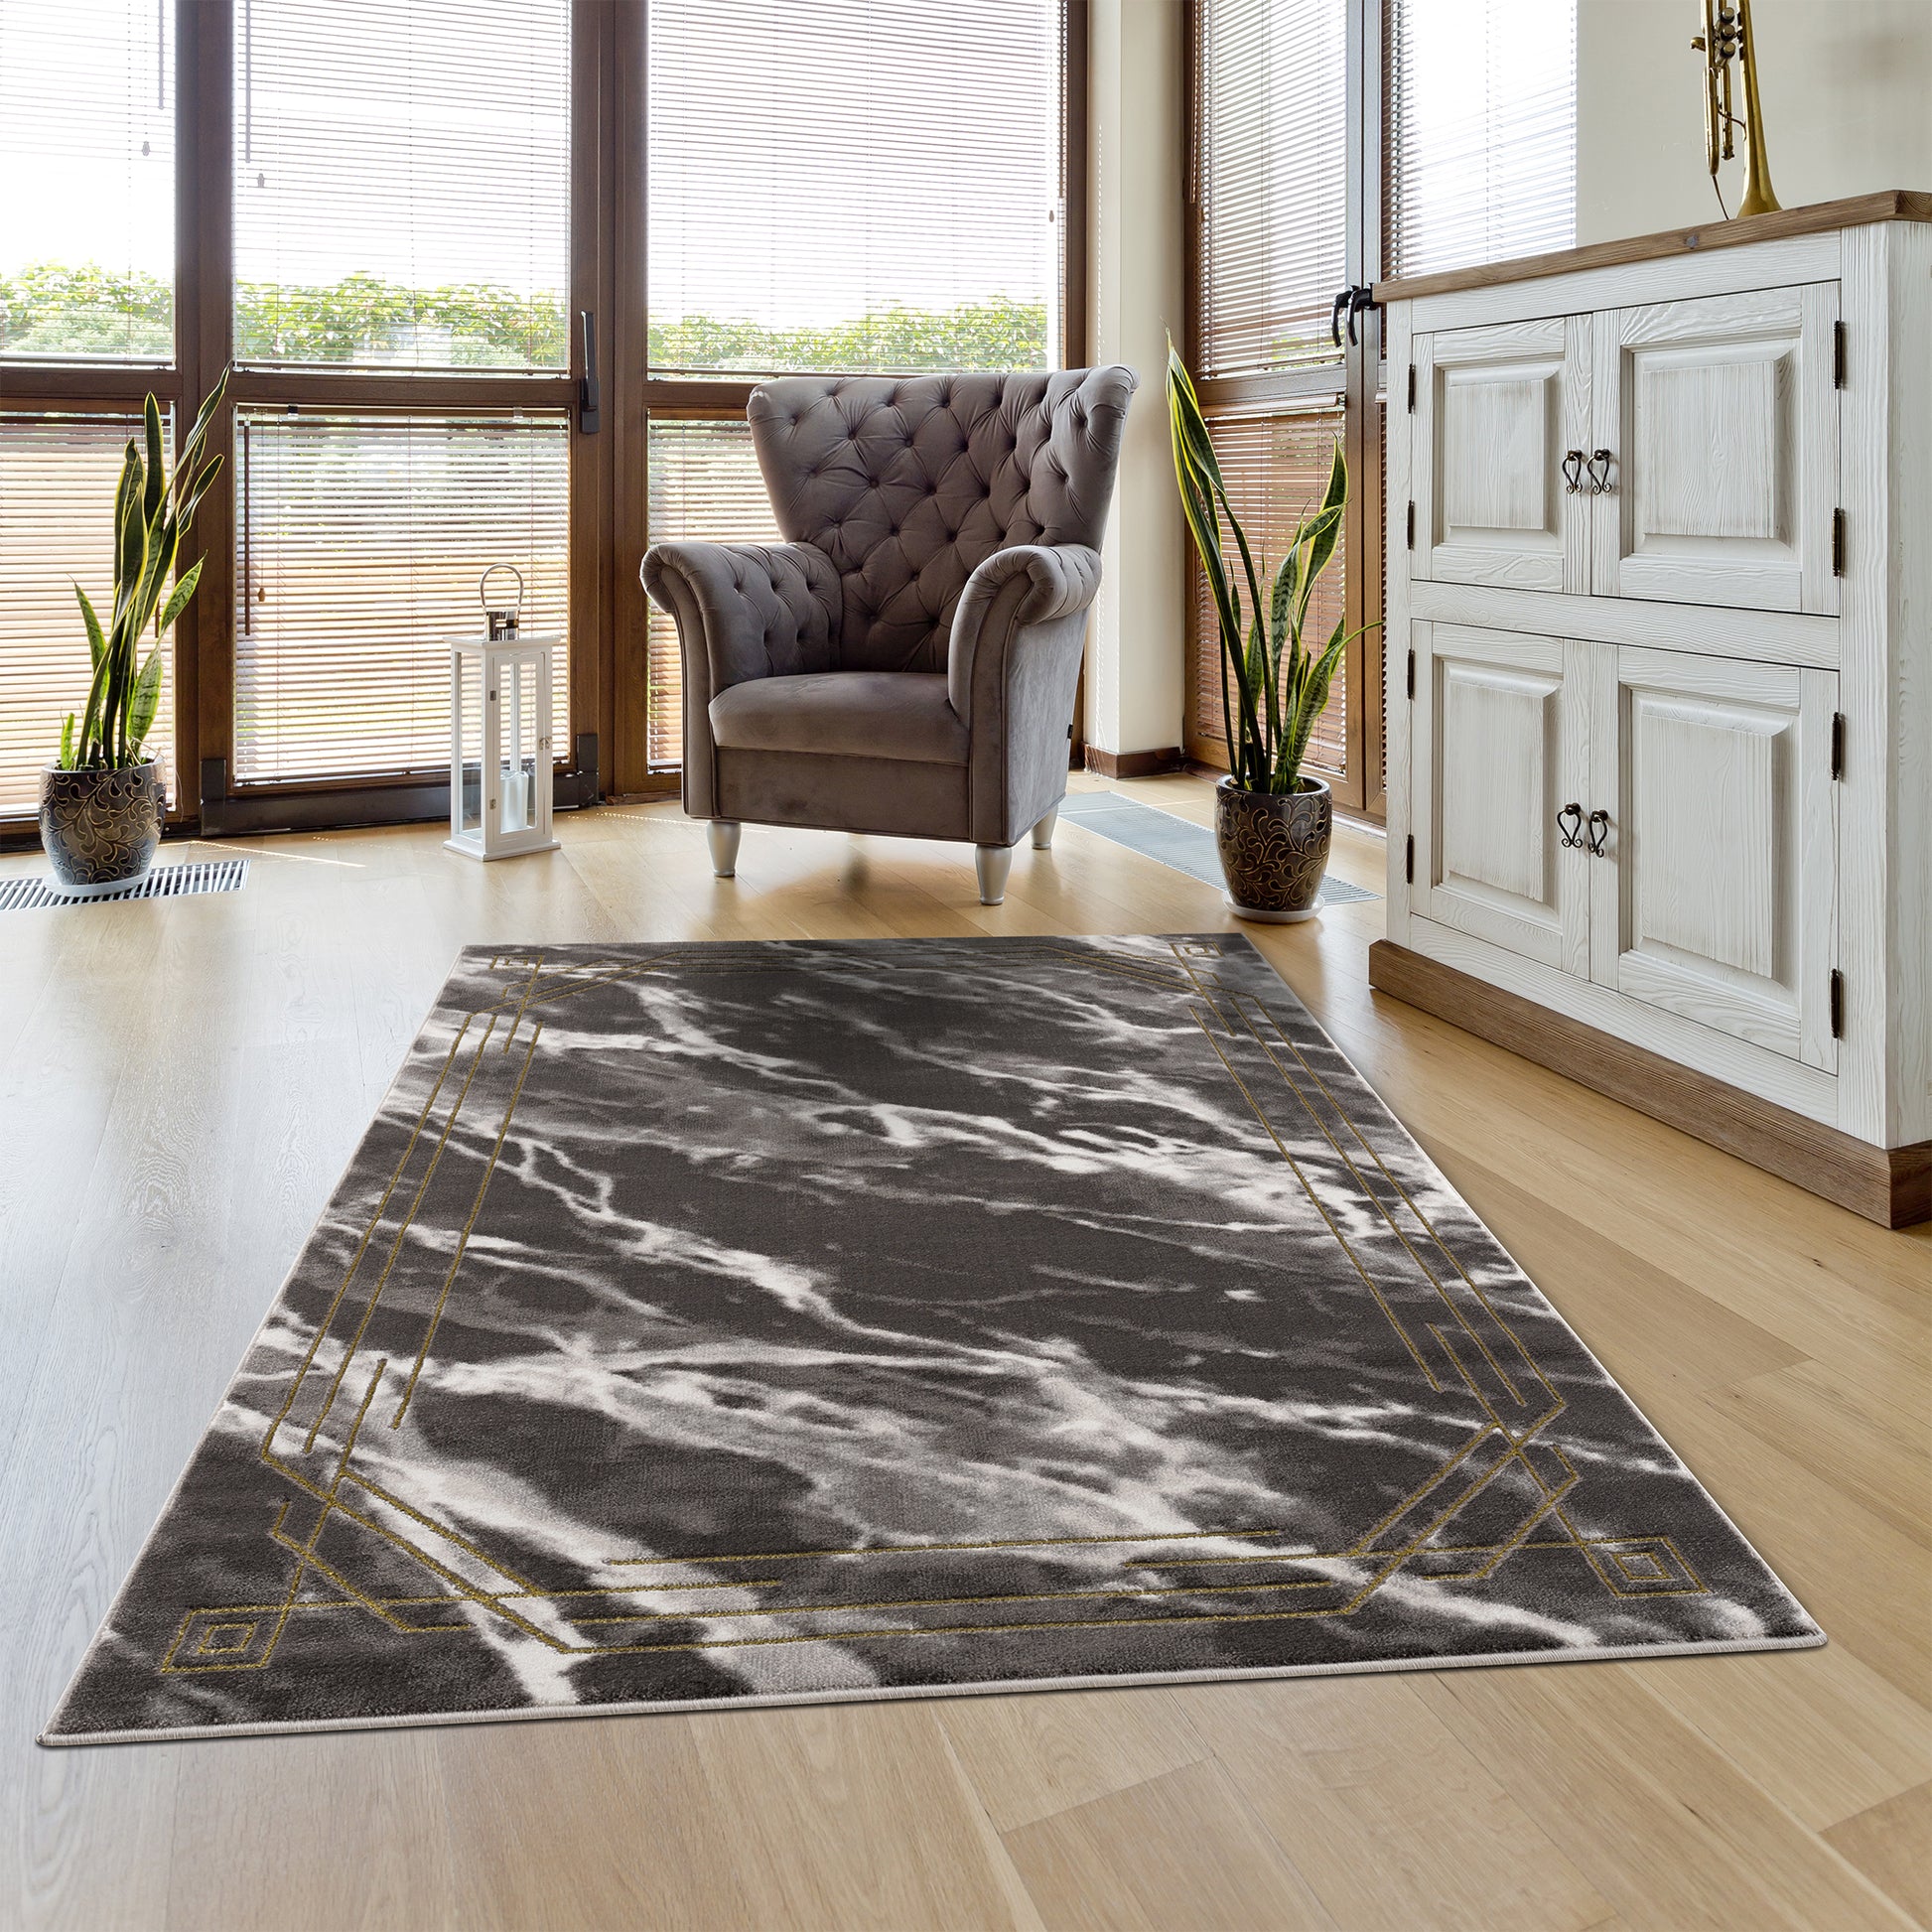 la dole rugs modern minimalistic marble pattern abstract rustic grey charcoal gold bordered area rug 9x12, 10x13 ft Large Big Carpet, Living Room, Beroom